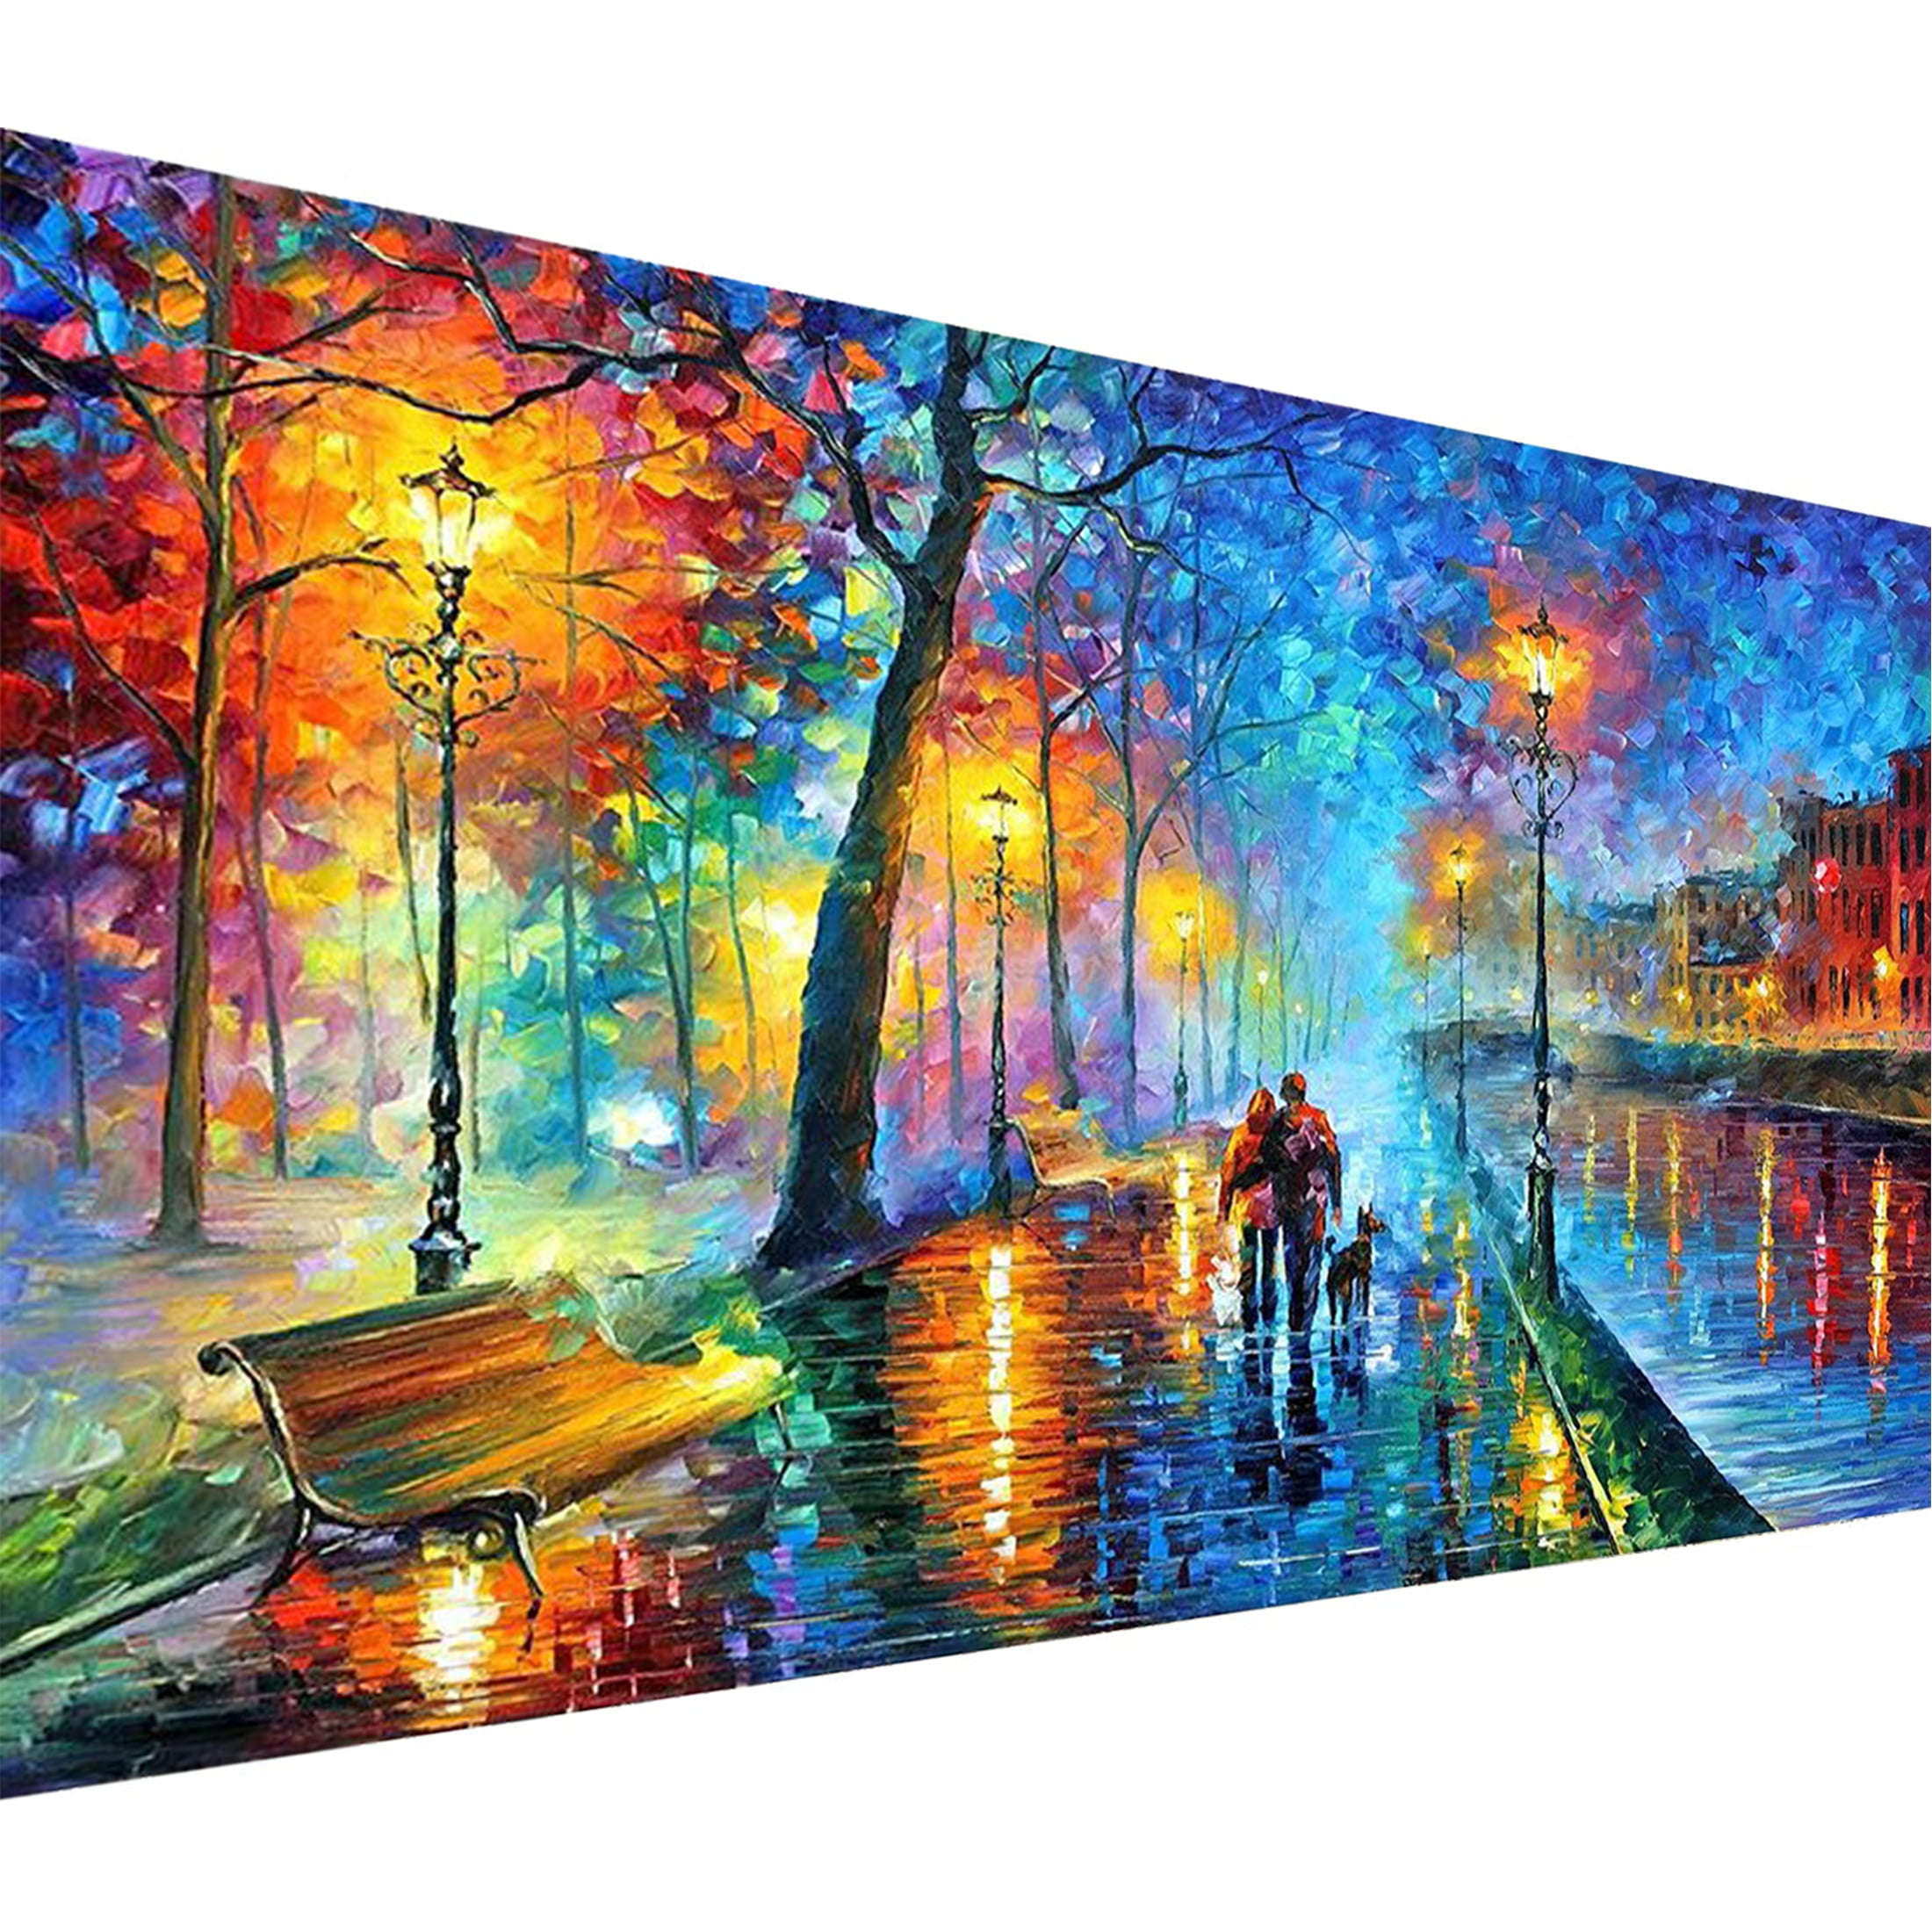 YALKIN Large Diamond Painting Kits for Adults(31.5 x 15.7 inch), DIY 5D  Diamond Painting Oil Street Paint by Number with Gem Art Drill Dotz for  Kids